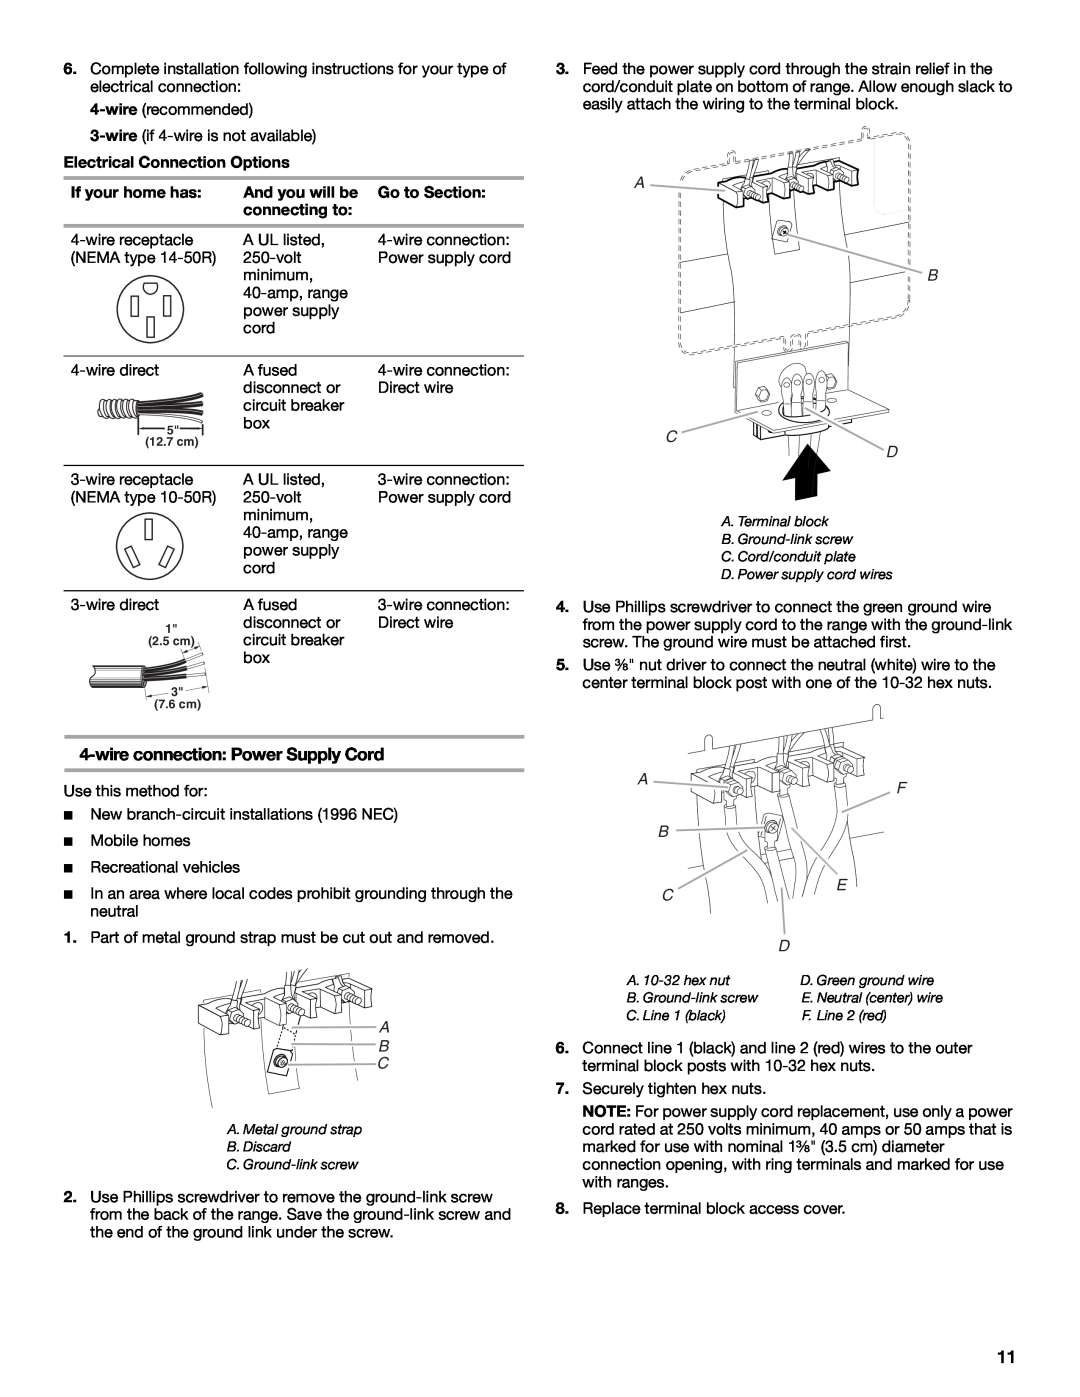 KitchenAid W10526086A wire connection Power Supply Cord, Electrical Connection Options, If your home has, And you will be 